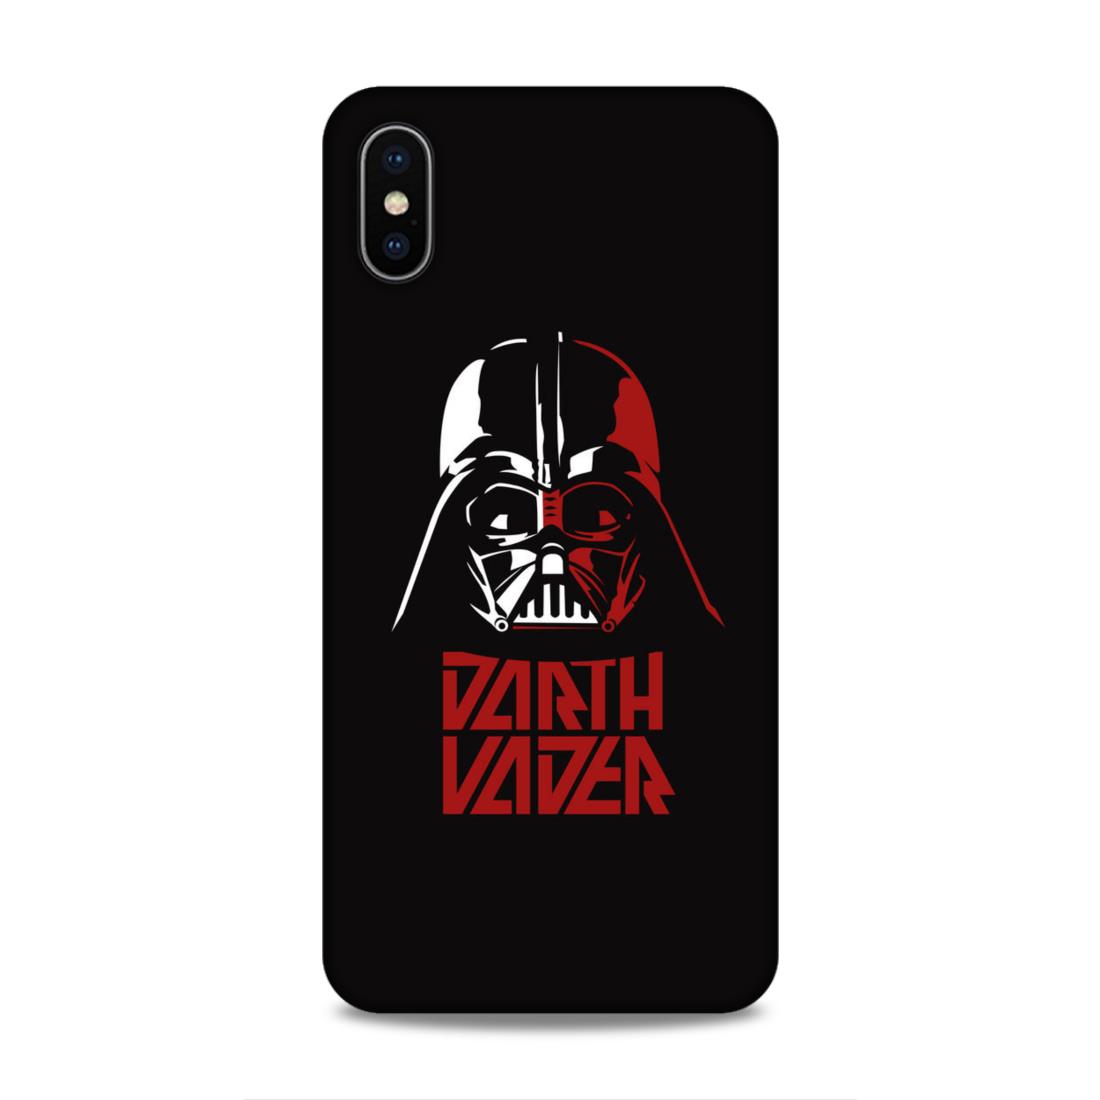 Darth Vader Hard Back Case For Apple iPhone XS Max